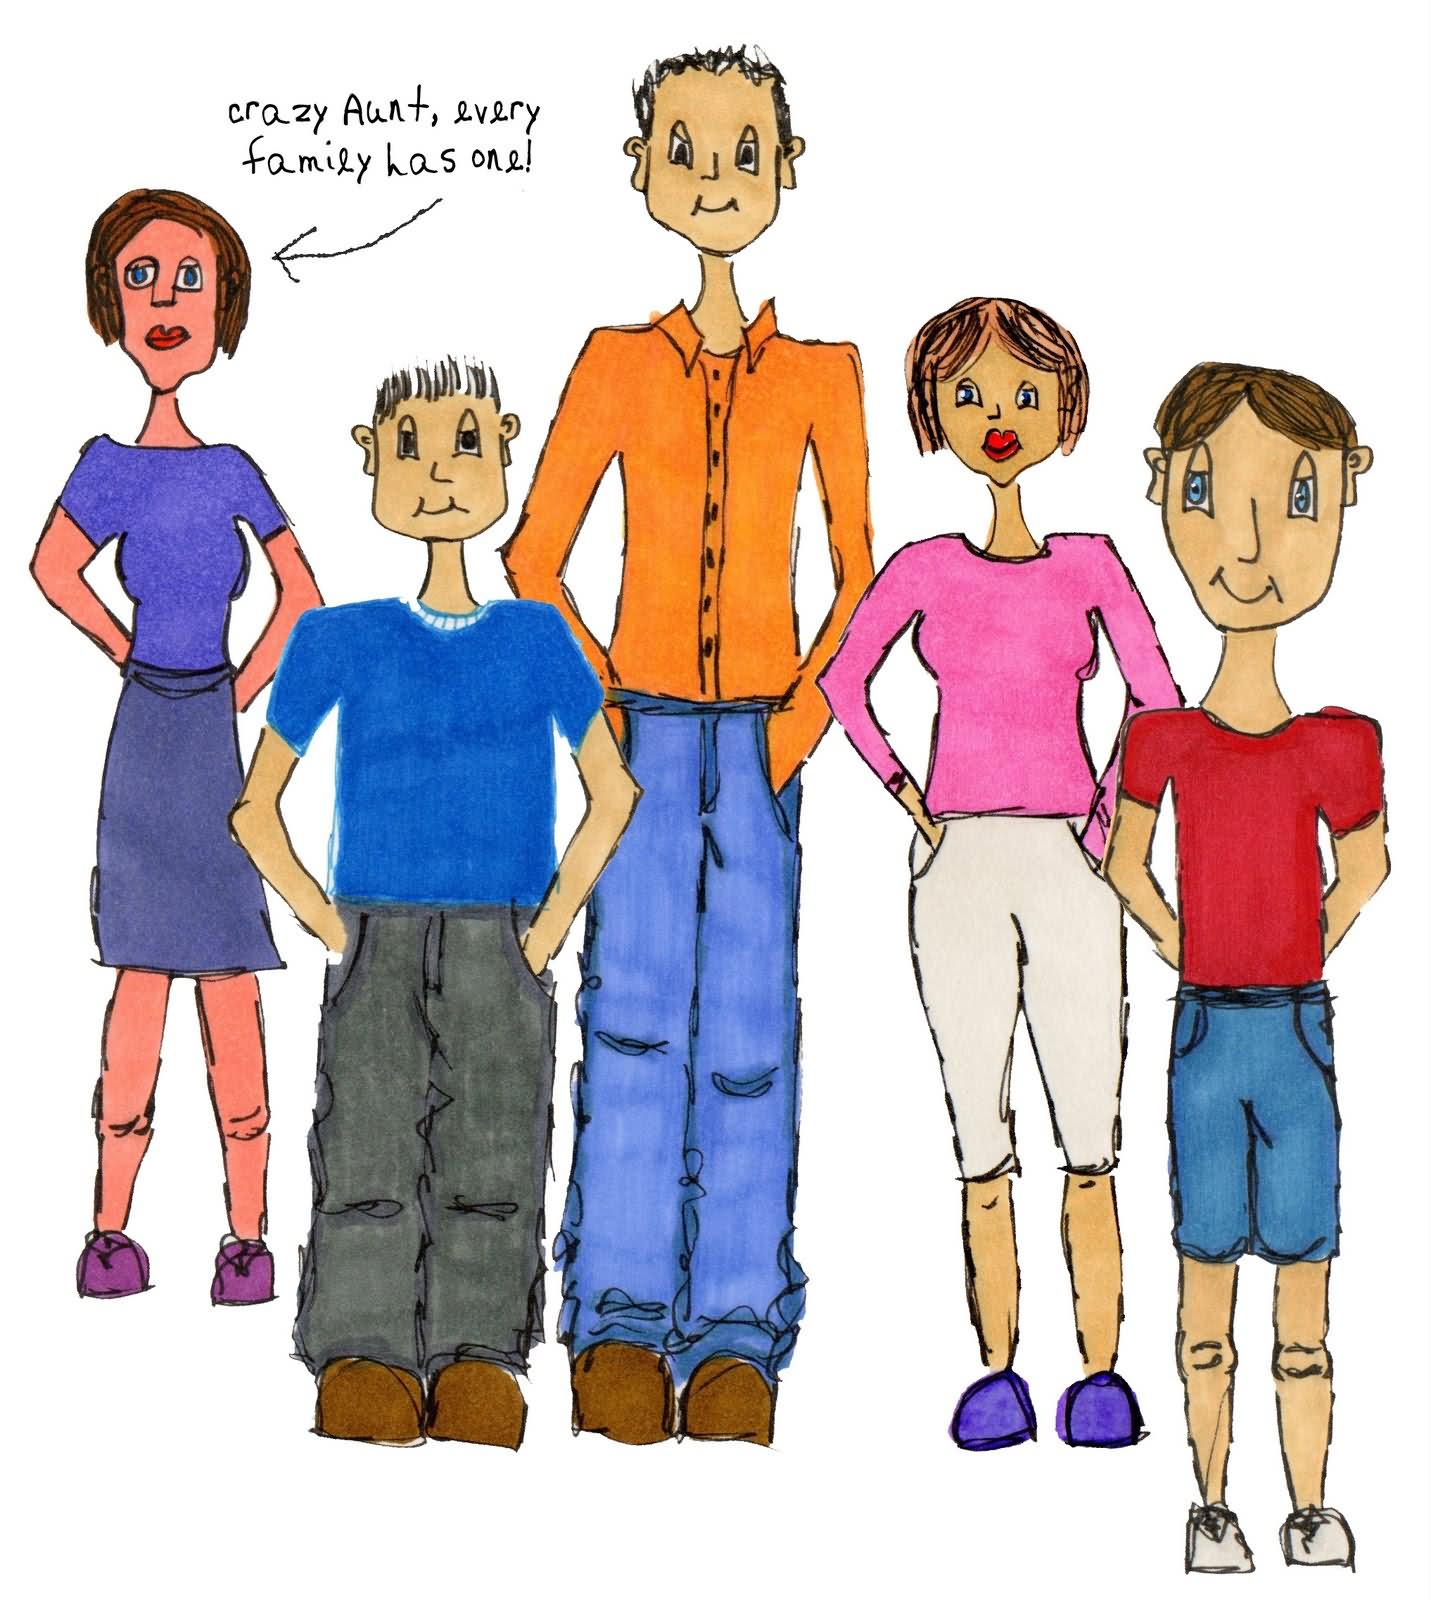 Crazy Family Cartoon Funny Picture